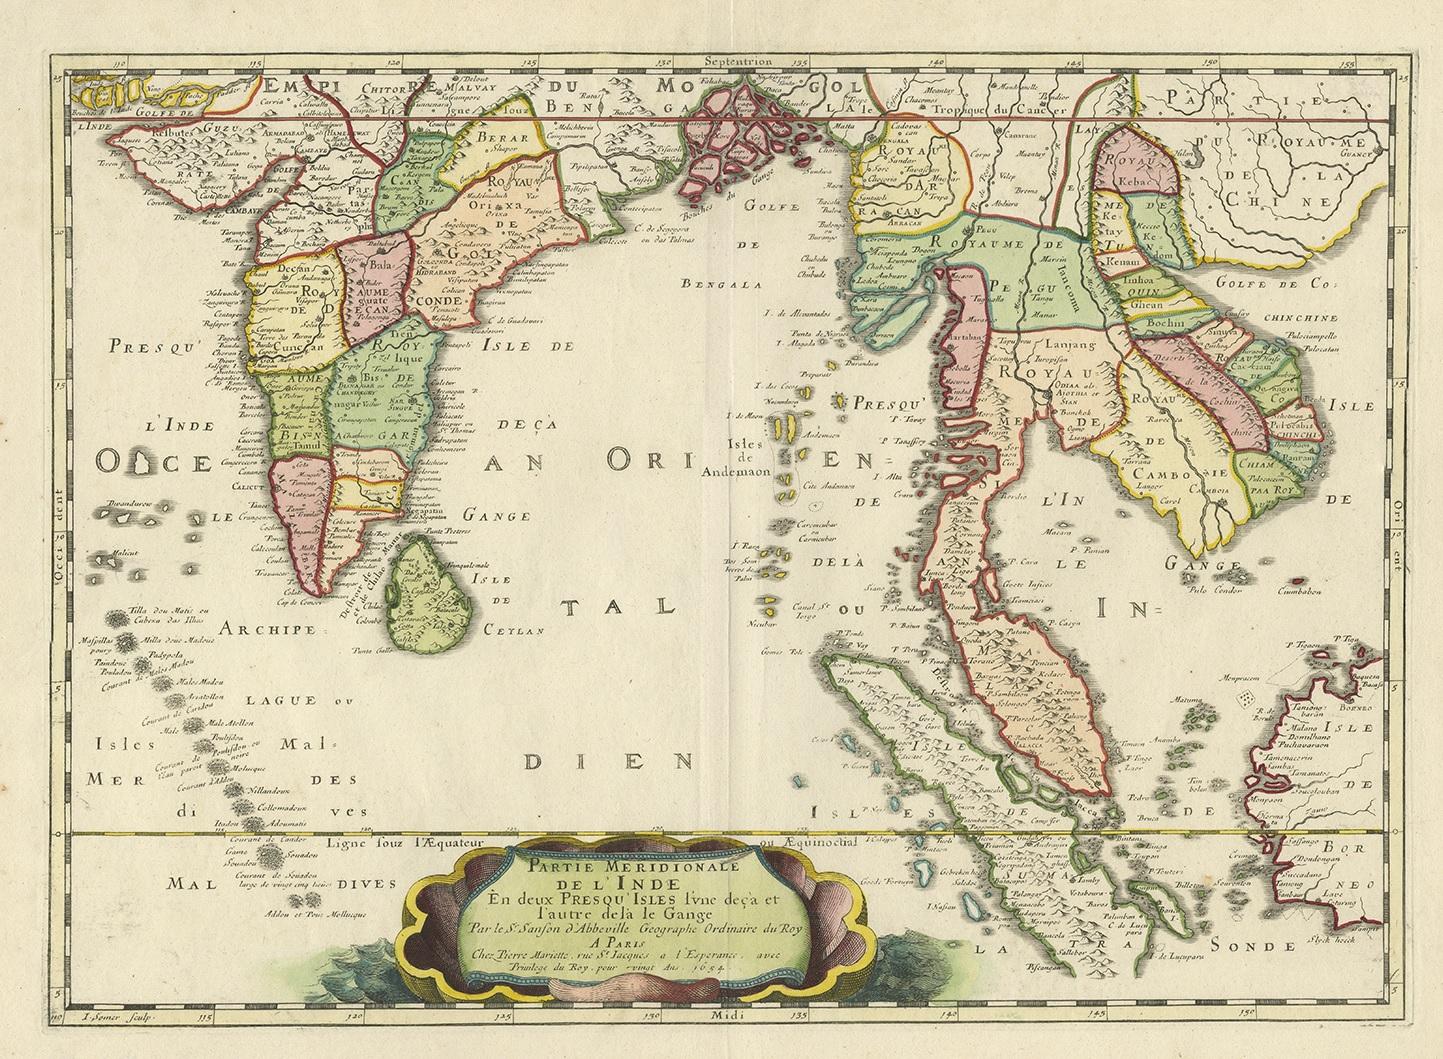 Antique map titled 'Partie Meridionale de l'Inde'. Early map of India and Southeast Asia. The map shows most of modern India, Bangladesh and Burma, the whole of Sri Lanka, Thailand, Malaysia, Laos, Cambodia, and Vietnam, and parts of Indonesia and